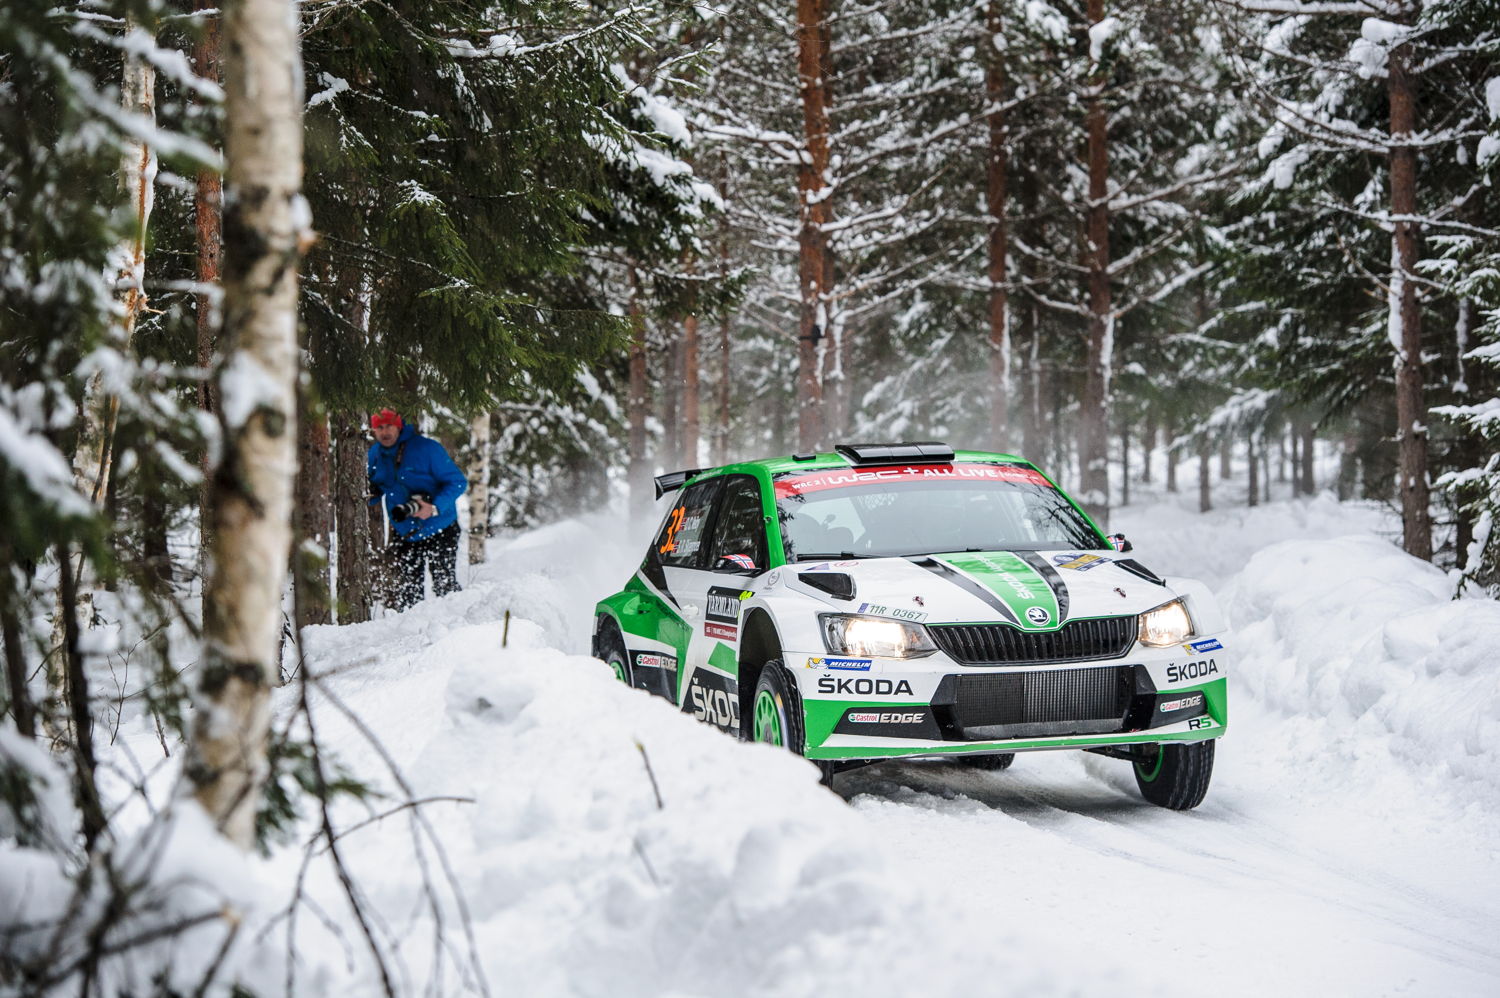 At Rally Sweden, second round of 2018 FIA World Rally Championship (WRC), Ole Christian Veiby and co-driver Stig Rune Skjærmoen (ŠKODA FABIA R5) are fighting for victory in the WRC 2 category